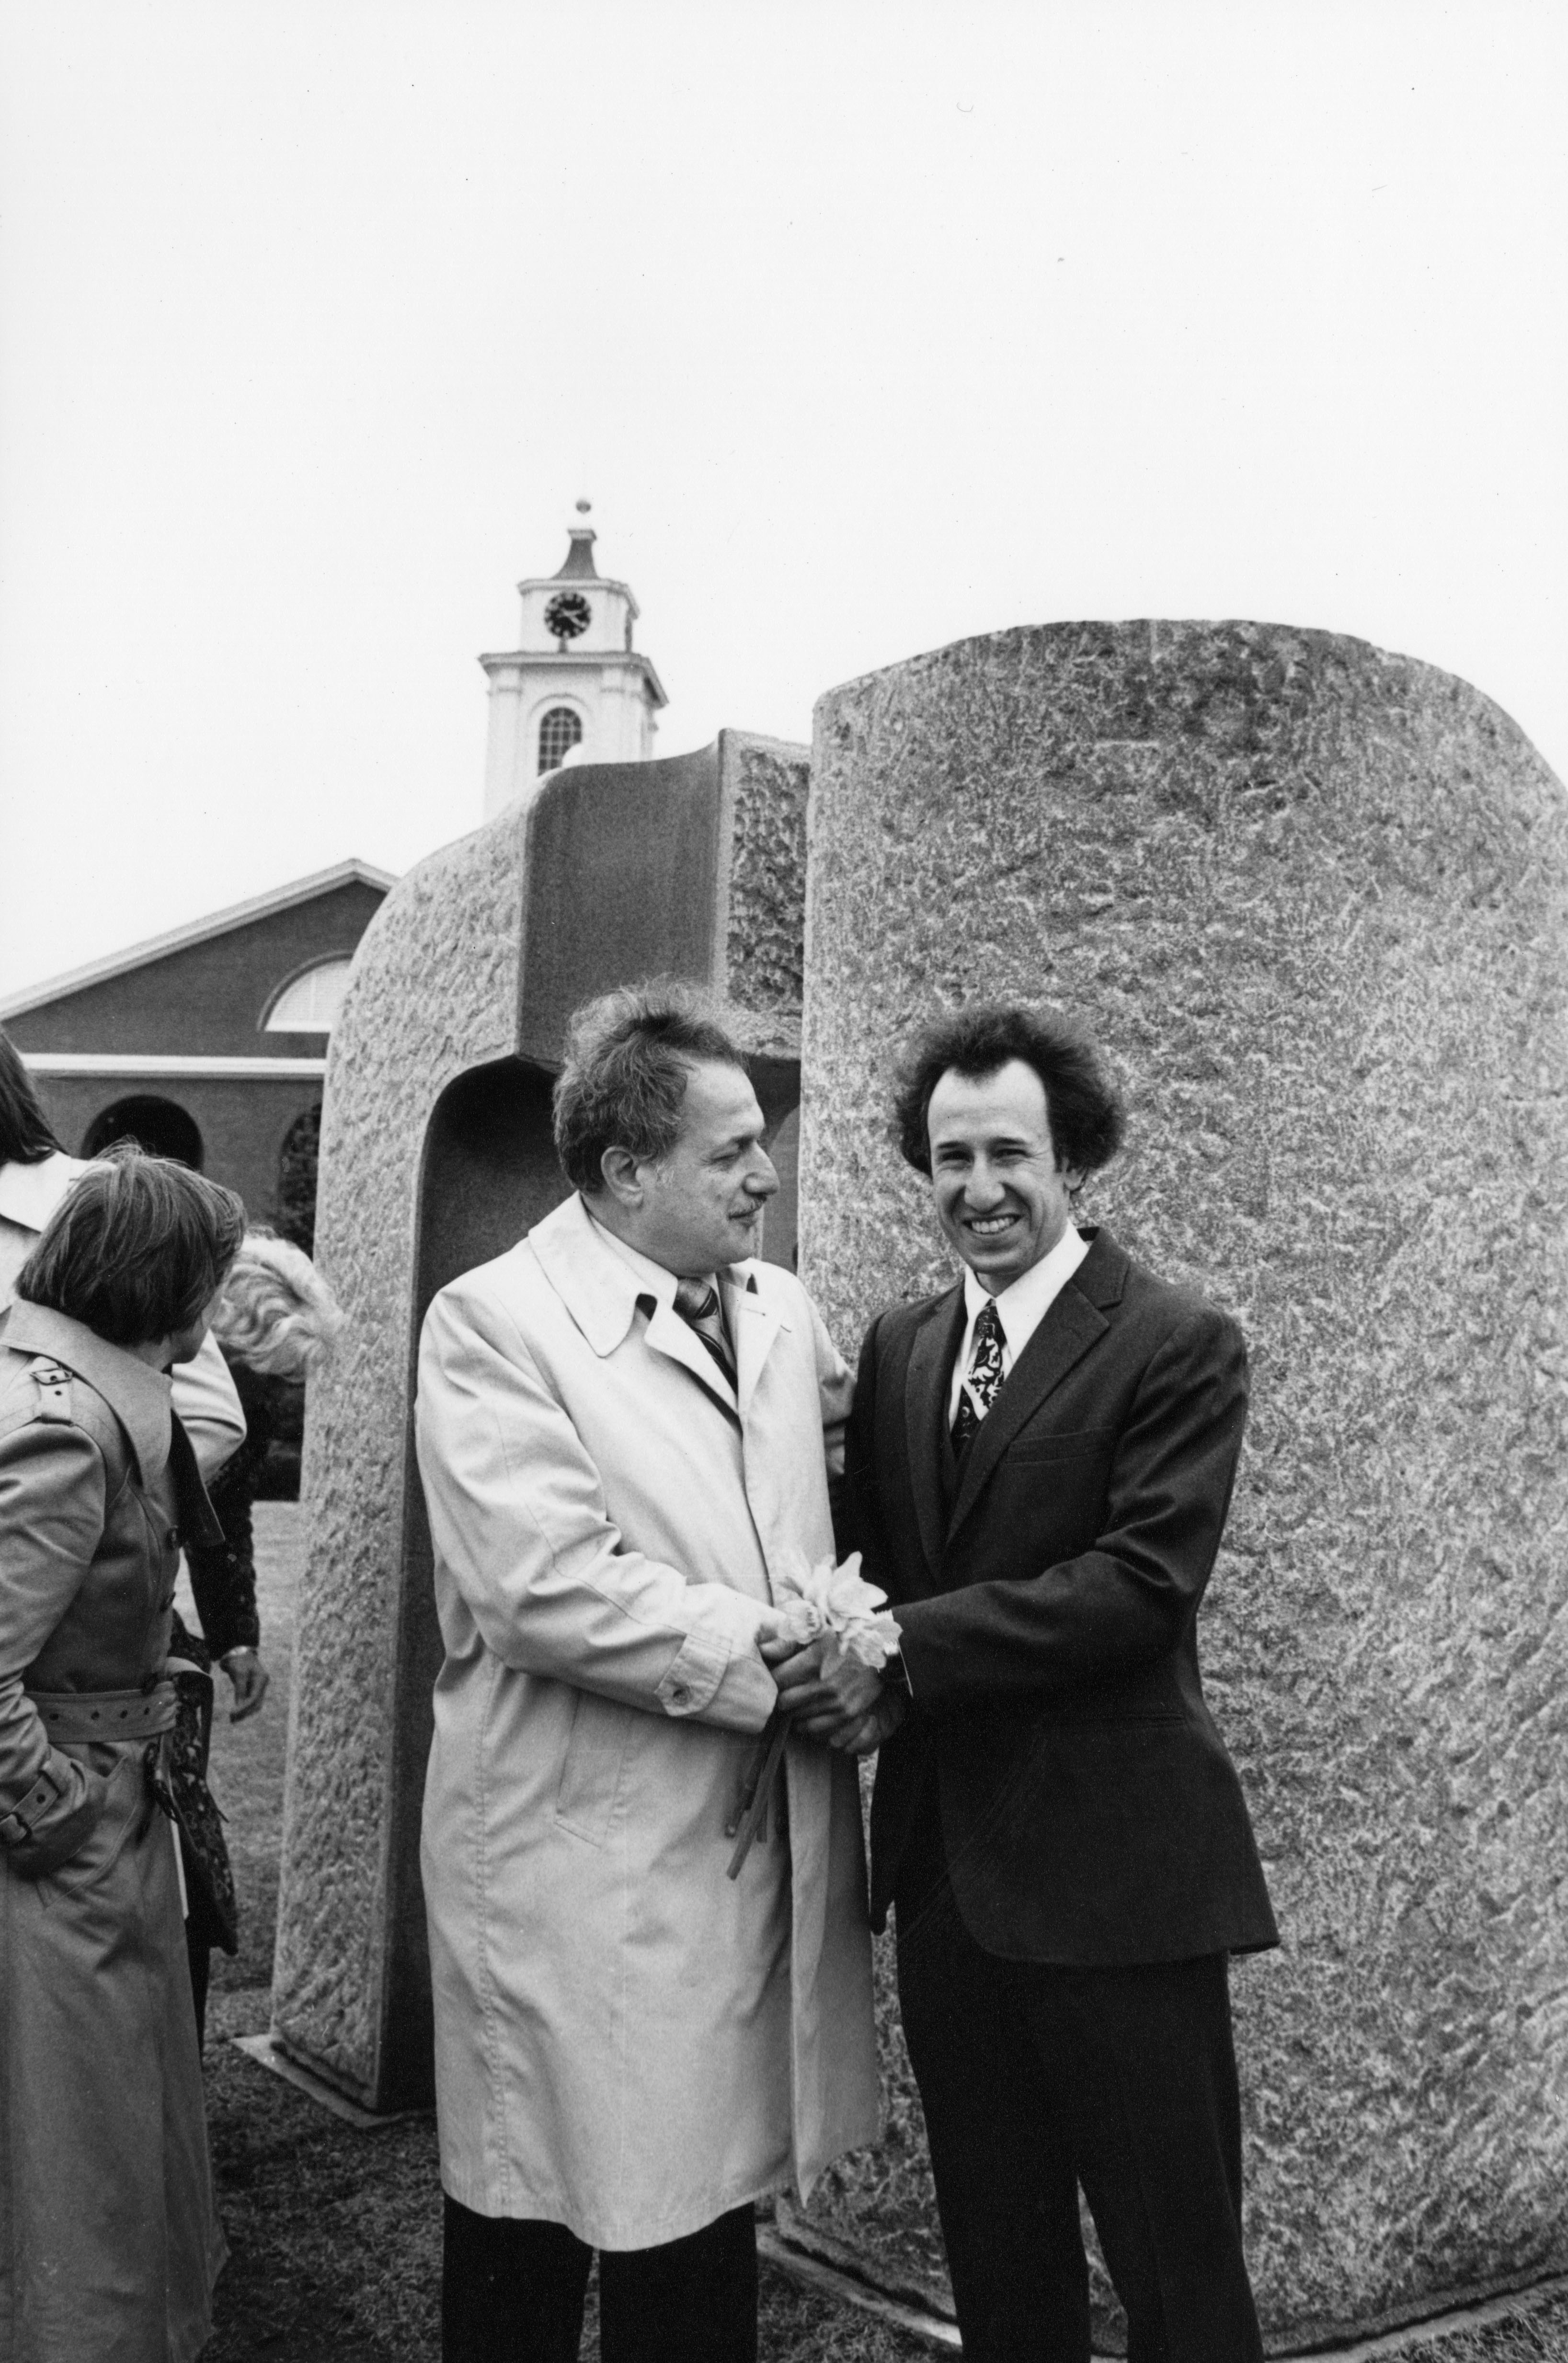 President Adamian and Carlos Dorrien shake hands at the official reception for "Portal" in March, 1980.